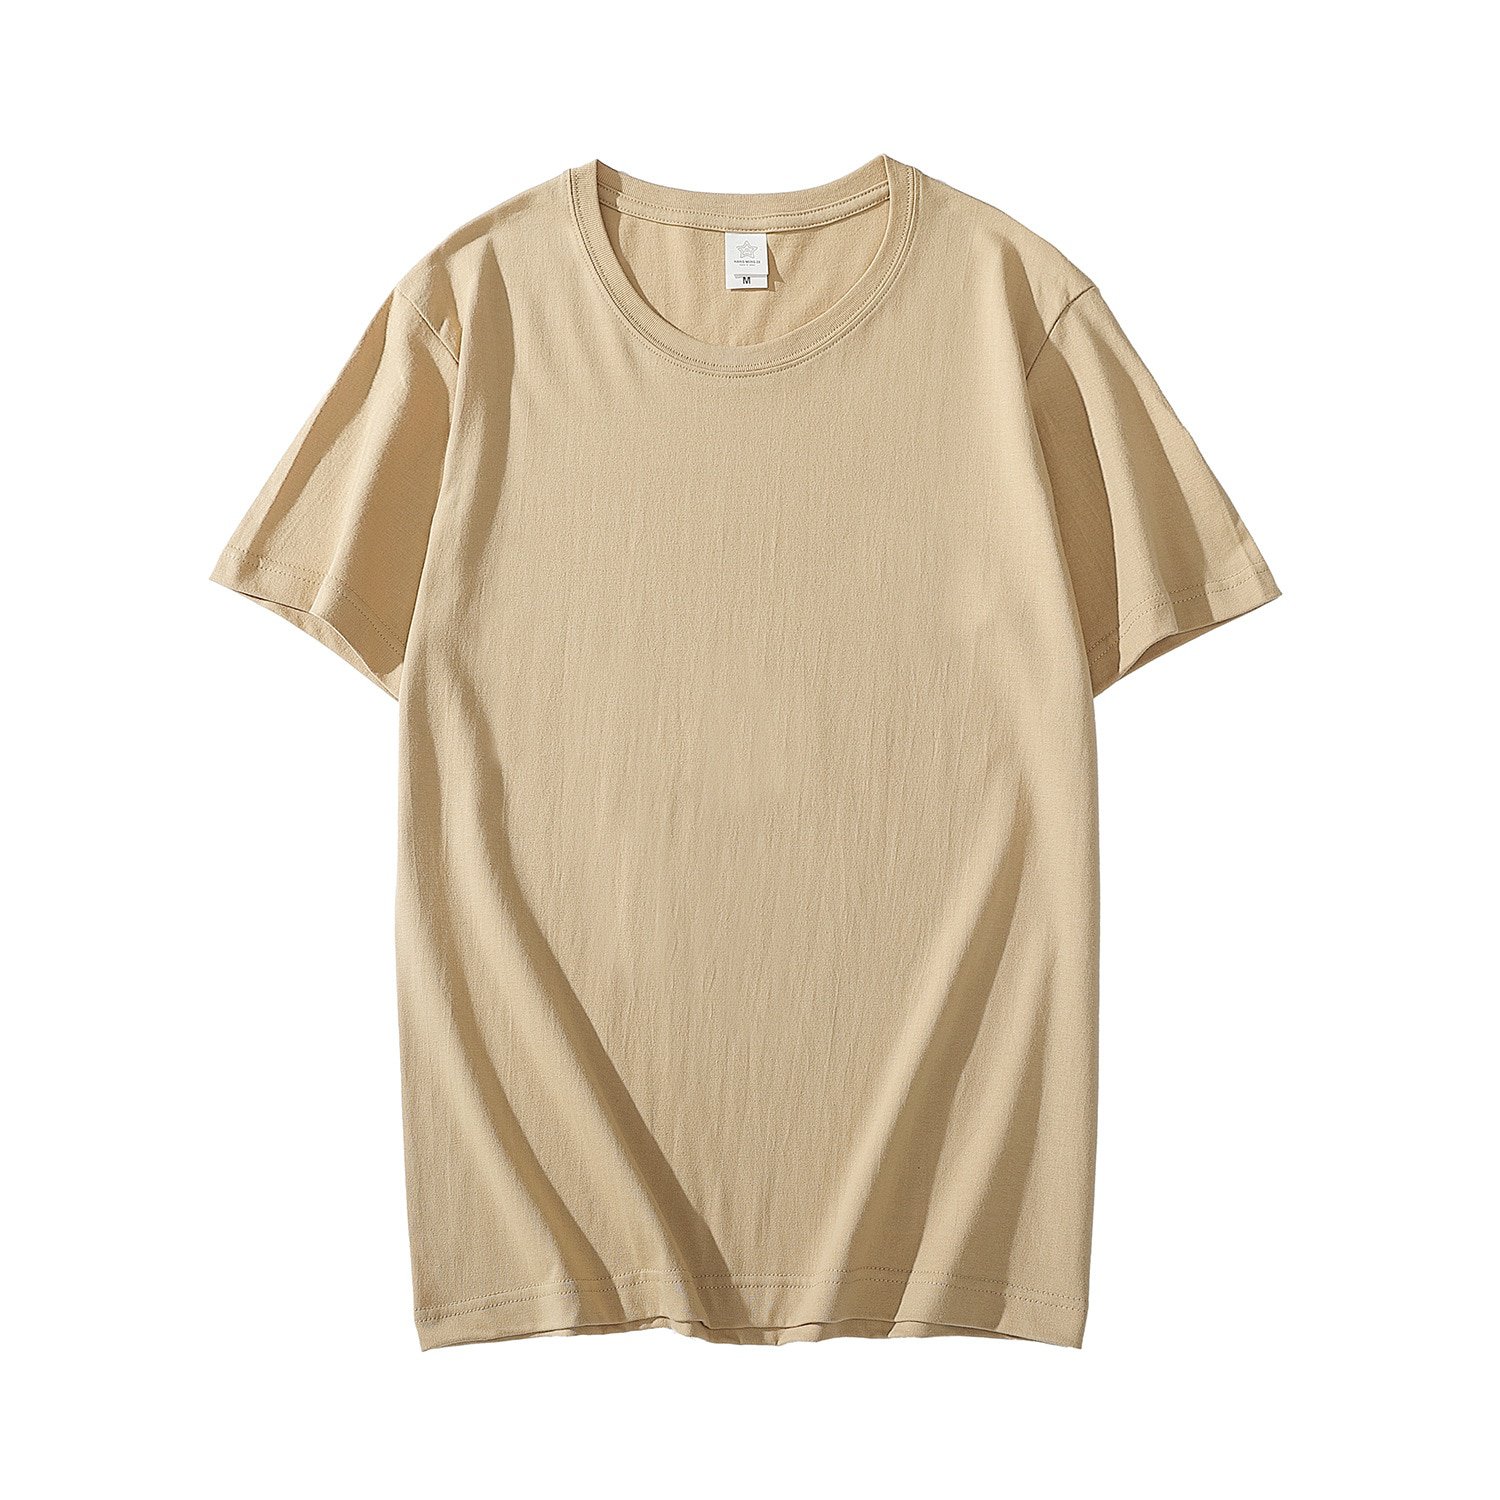 Cotton Short-sleeve Pure Color For Tops T-shirt Camel